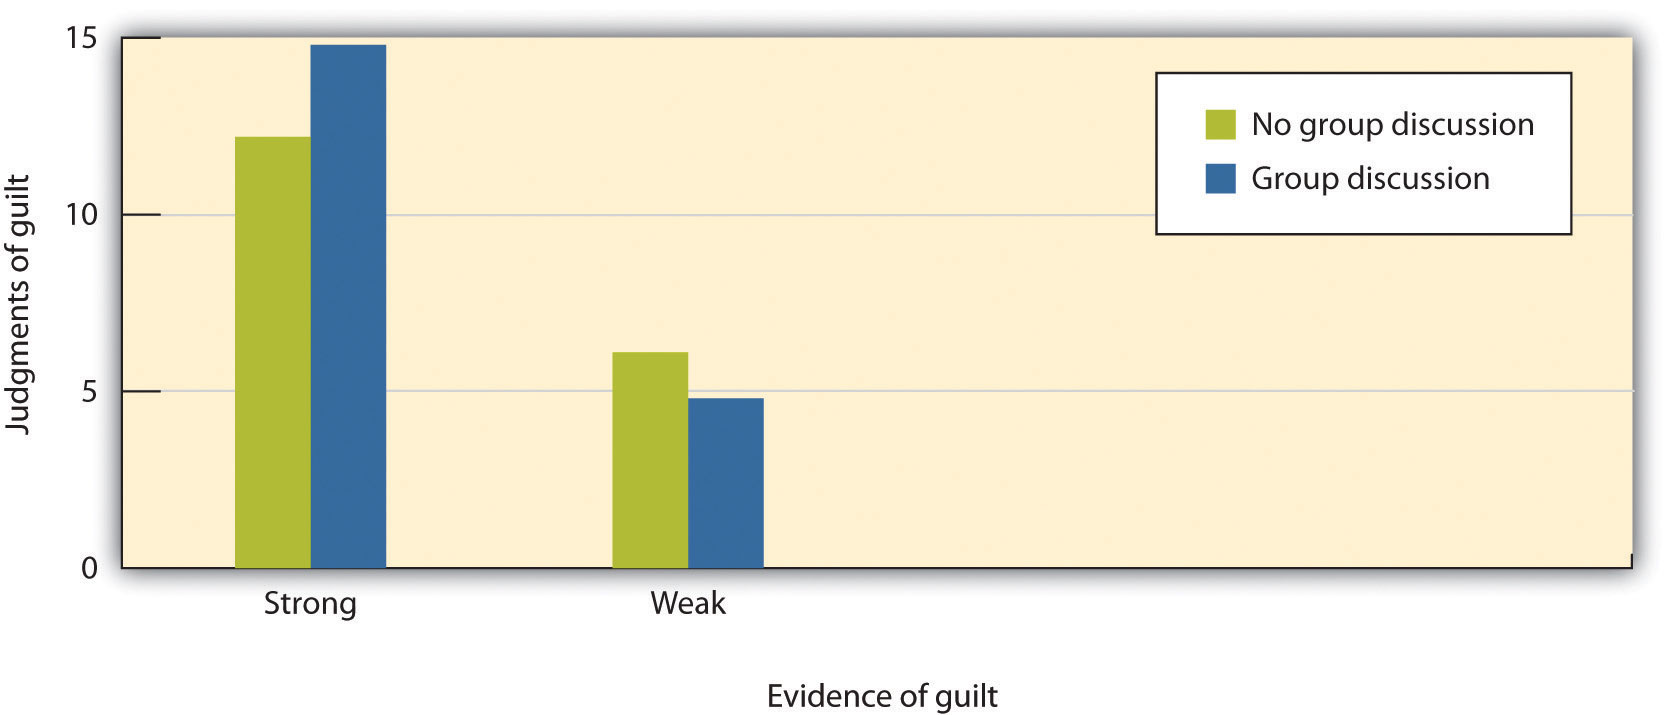 The juries in this research were given either strong or weak evidence about the guilt of a defendant and then were either allowed or not allowed to discuss the evidence before making a final decision. Demonstrating group polarization, the juries that discussed the case made significantly more extreme decisions than did the juries that did not discuss the case.